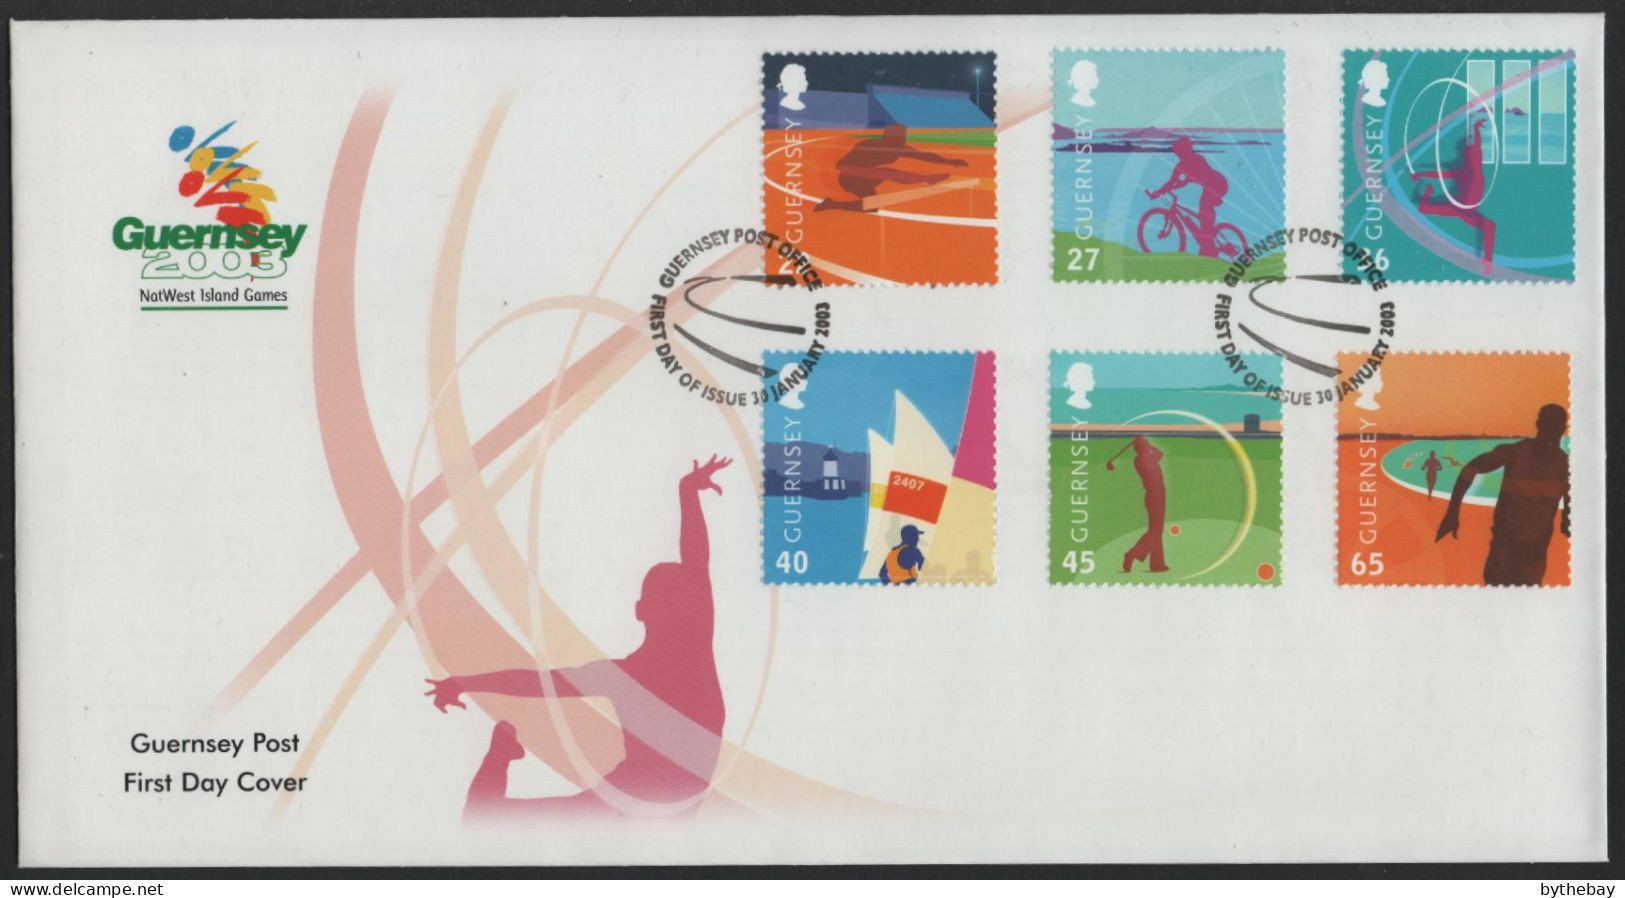 Guernsey 2003 FDC Sc 795-800 NatWest Island Games - Guernesey